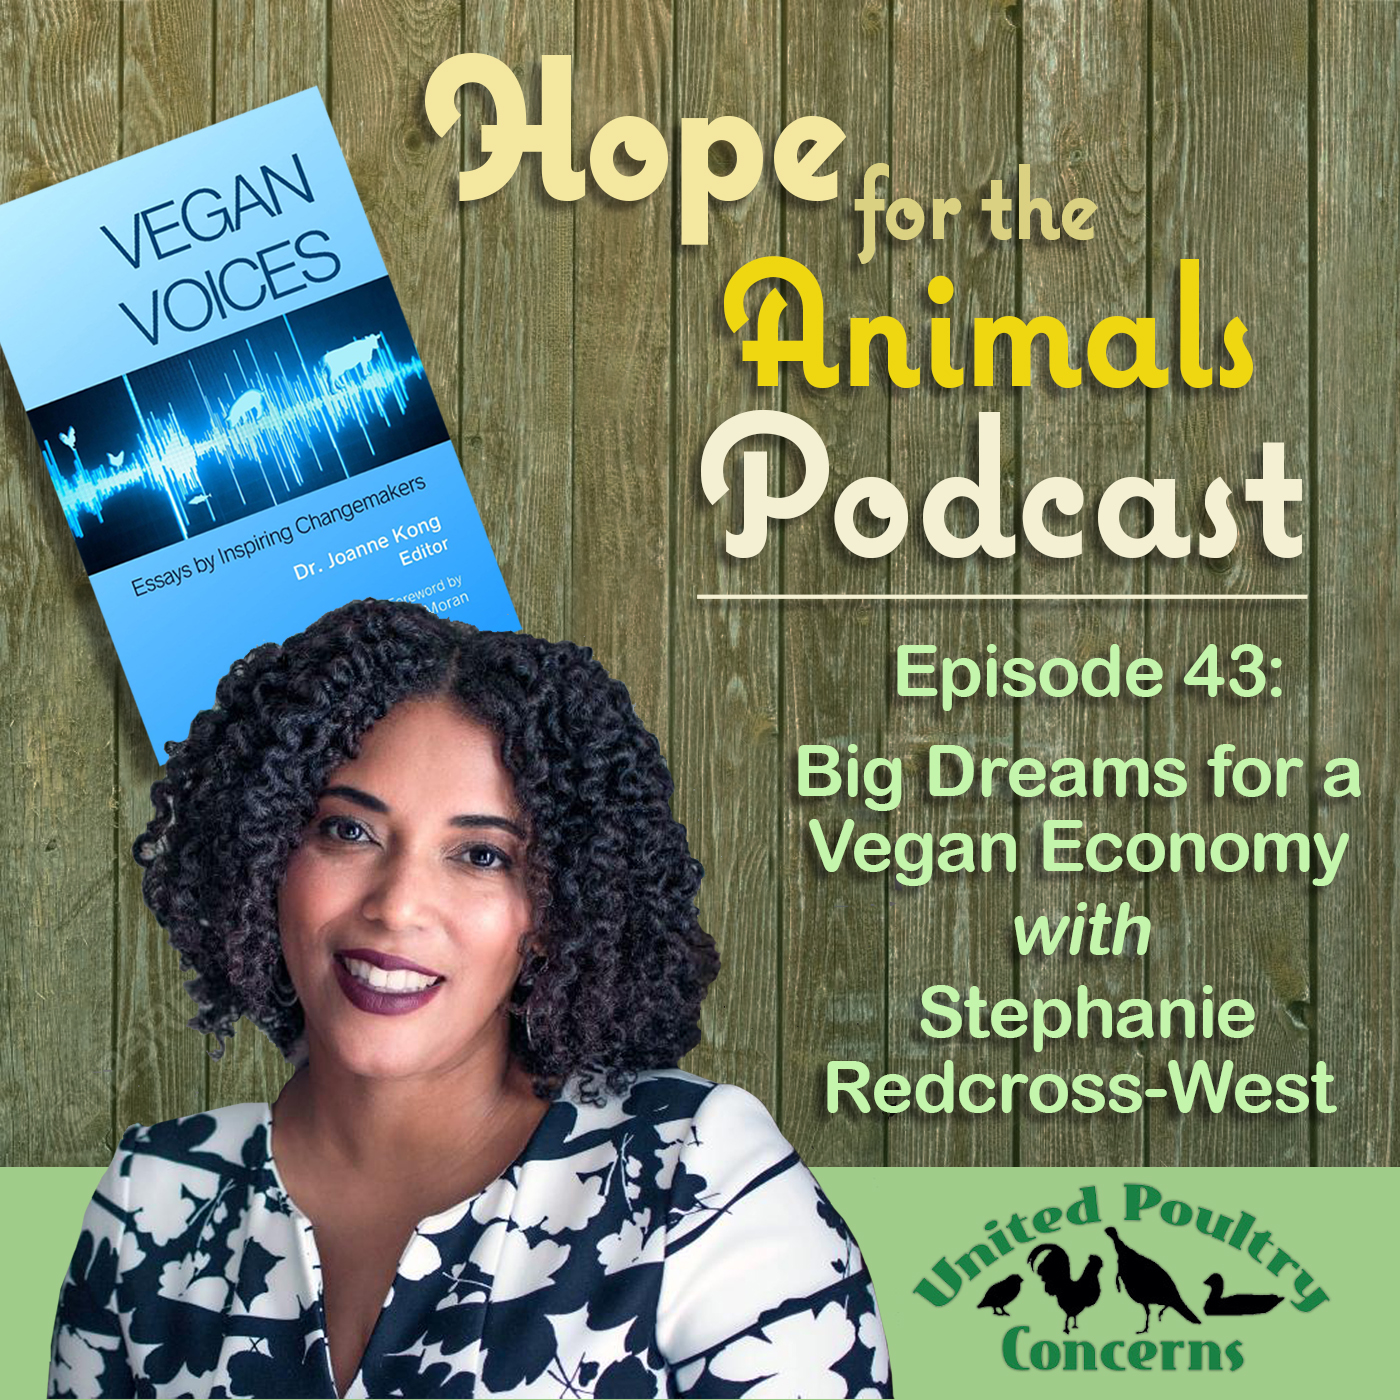 Episode 43: Big Dreams for a Vegan Economy with Stephanie Redcross-West